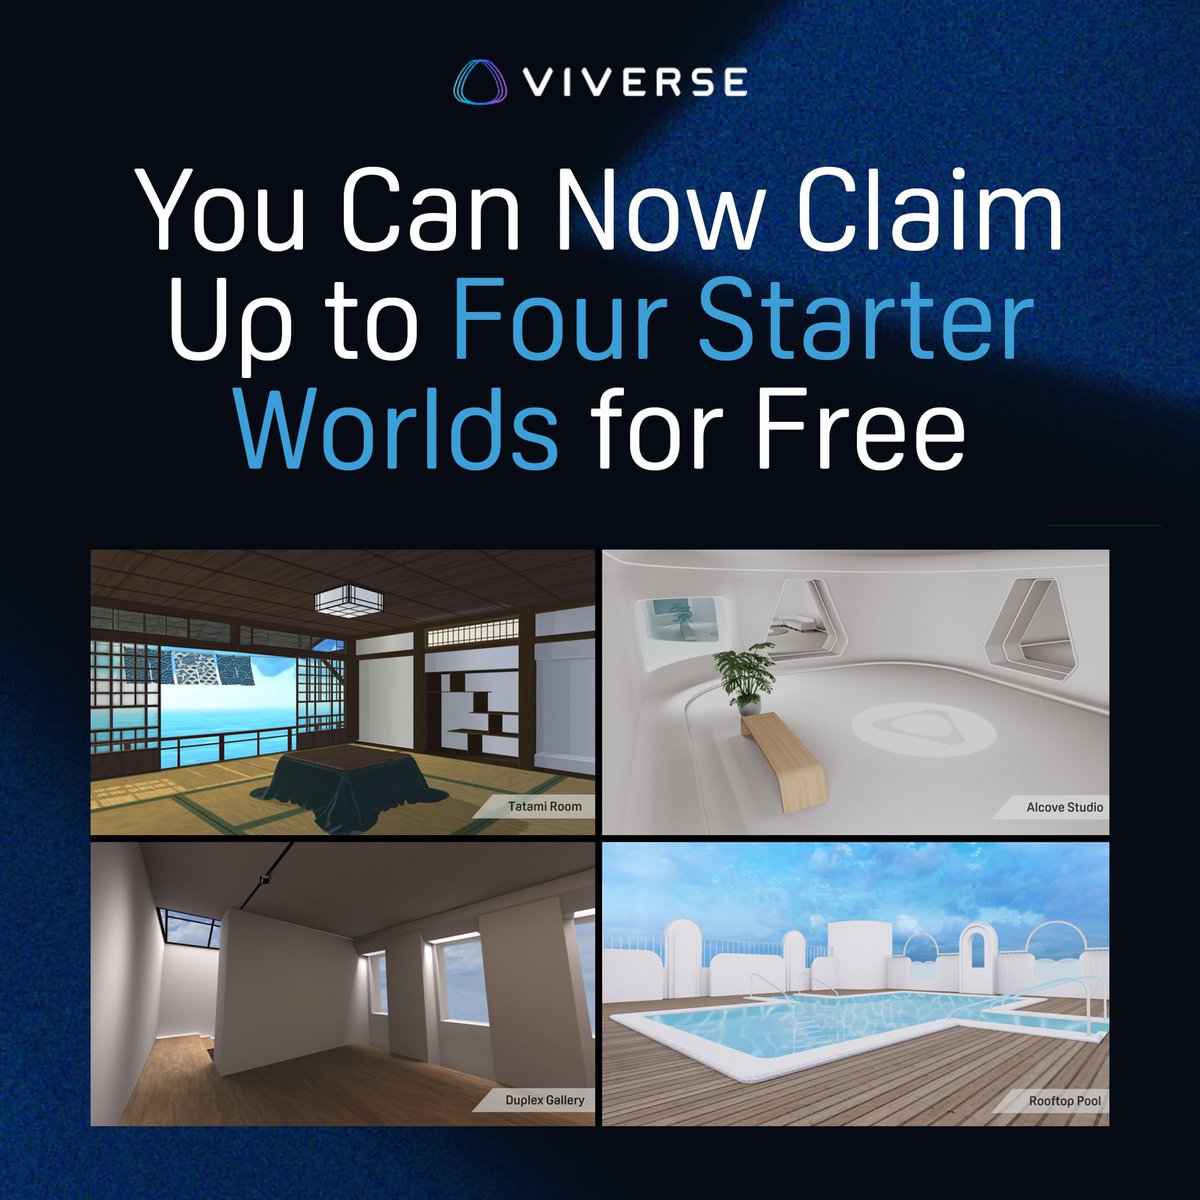 Choose from a variety of starter World styles to perfectly match your vision: htcvive.co/VV4SWX #VirtualWorld #VR #VRChat #TatamiRoom #AlcoveStudio #RooftopPool #DuplexGallery